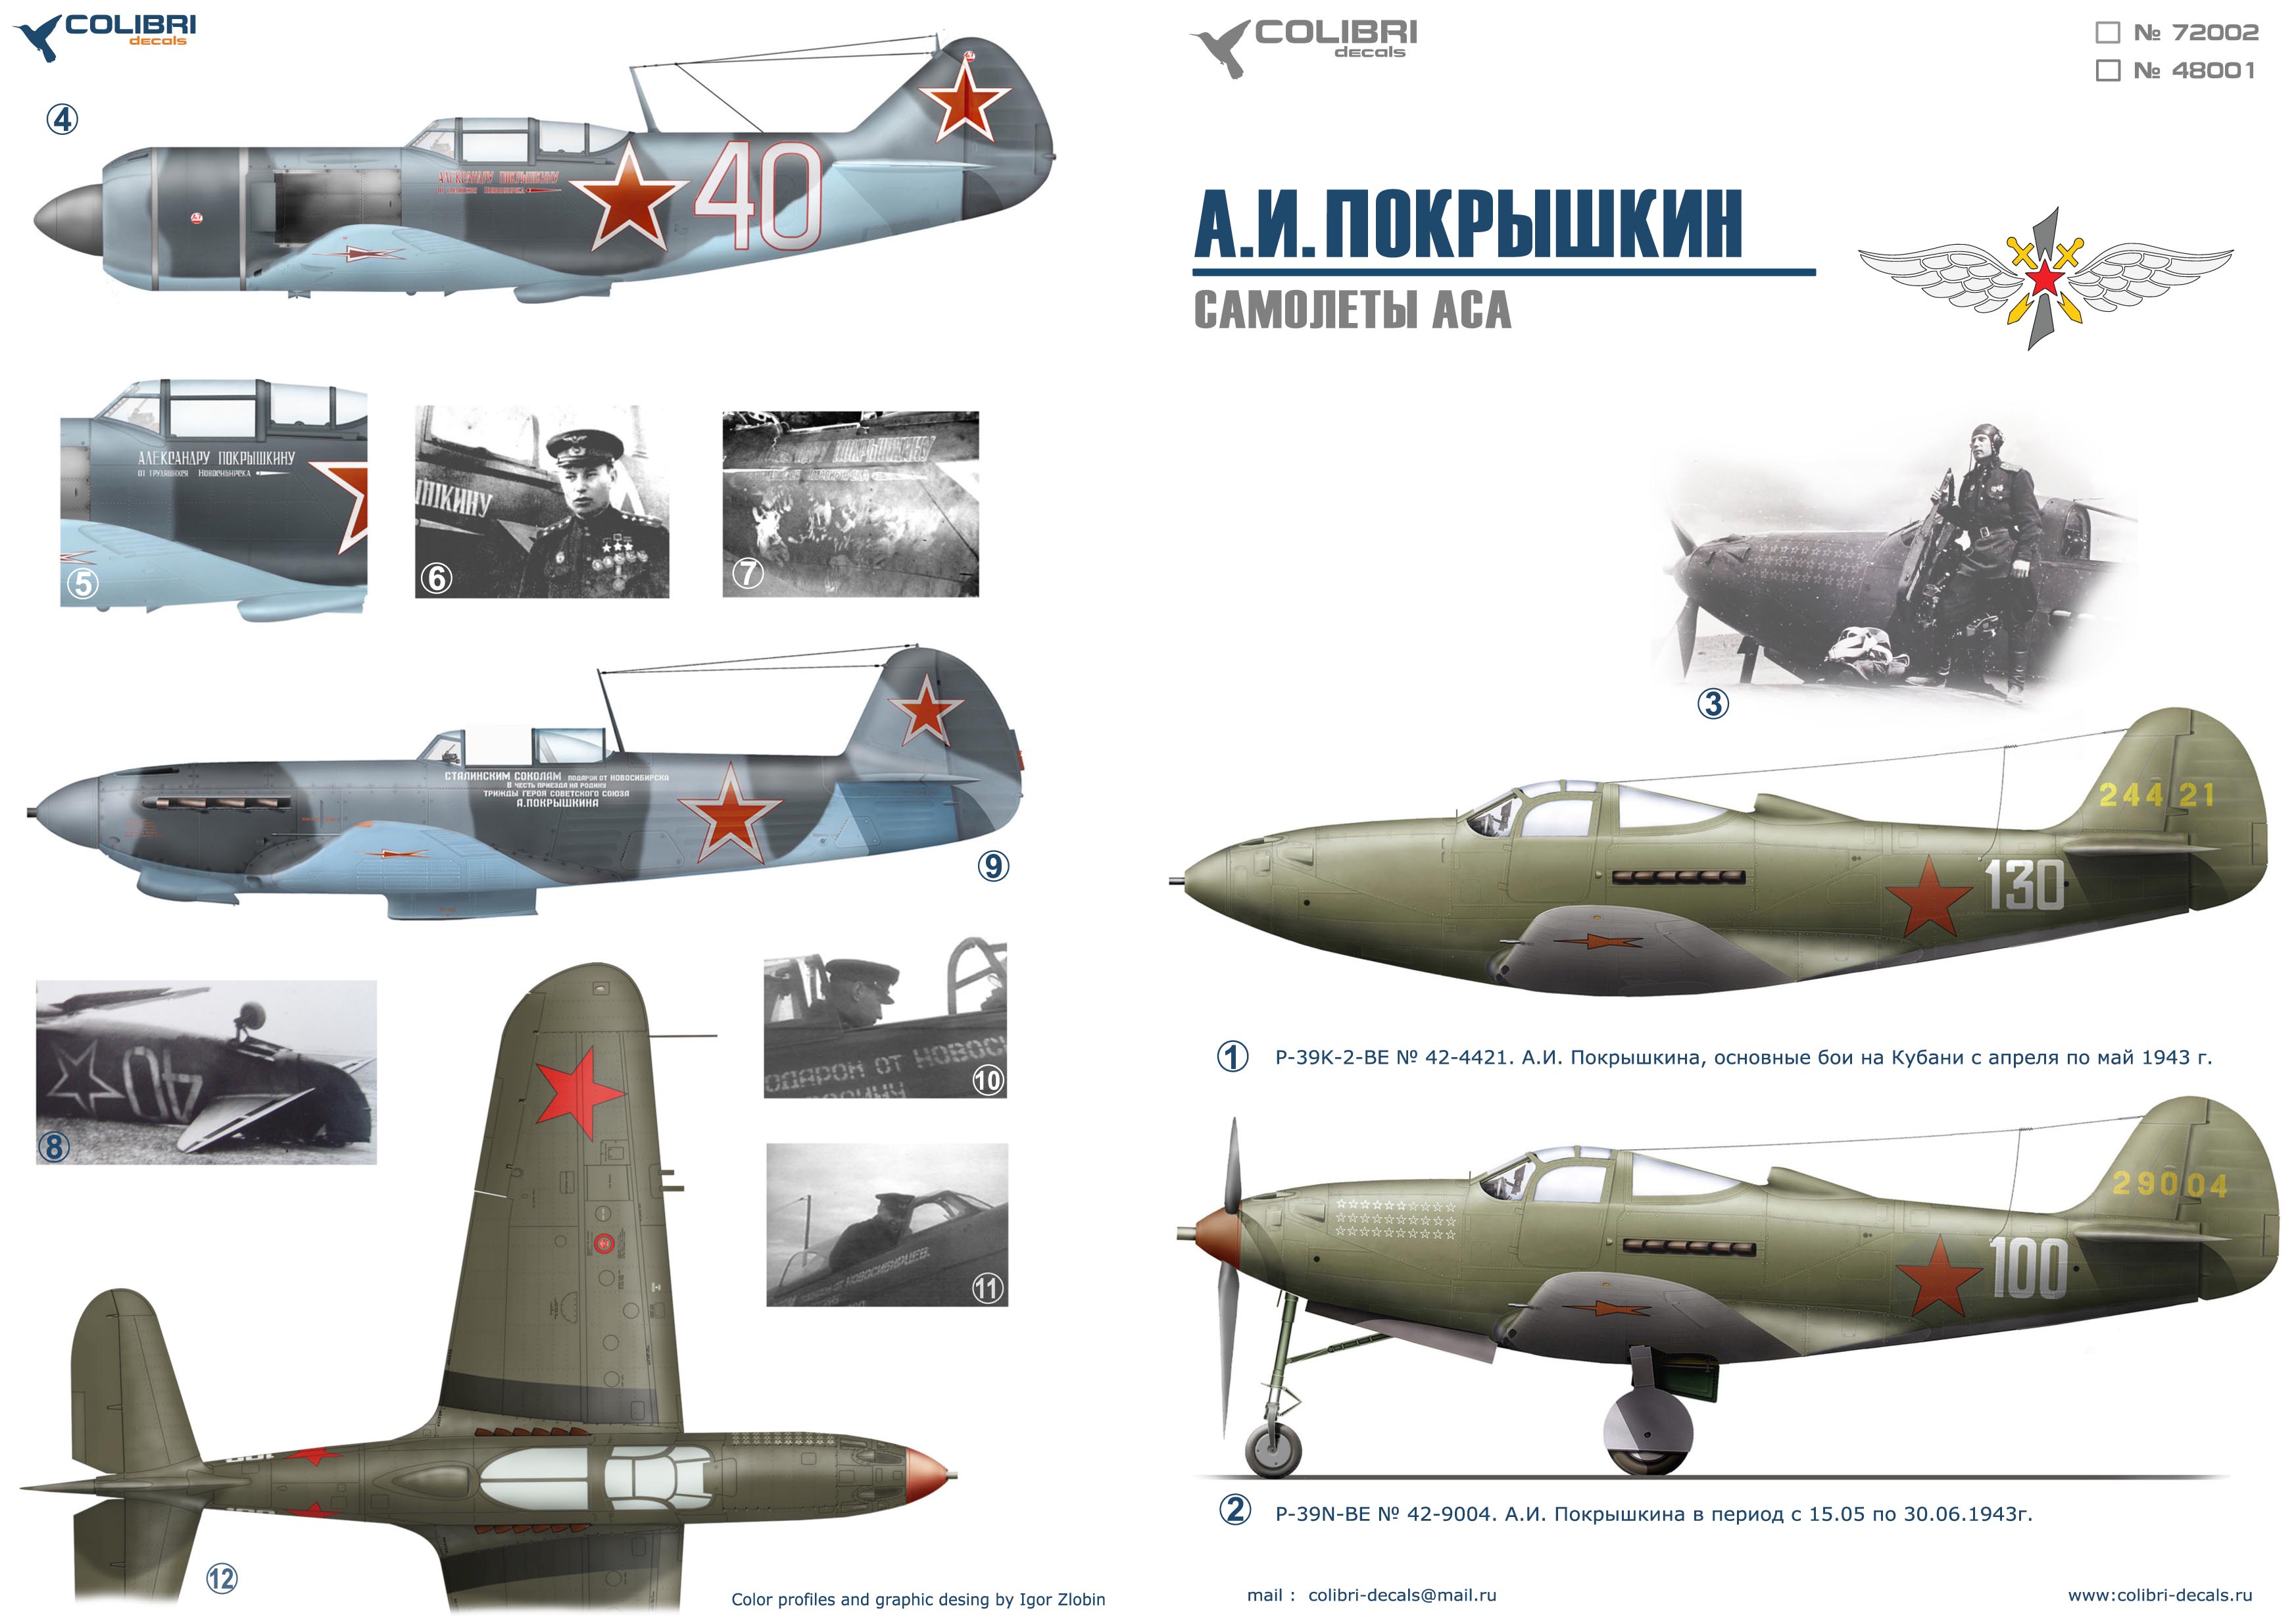 Decal 1/48 A. I. Pokryshkin - the aircraft Aces (Colibri Decals)